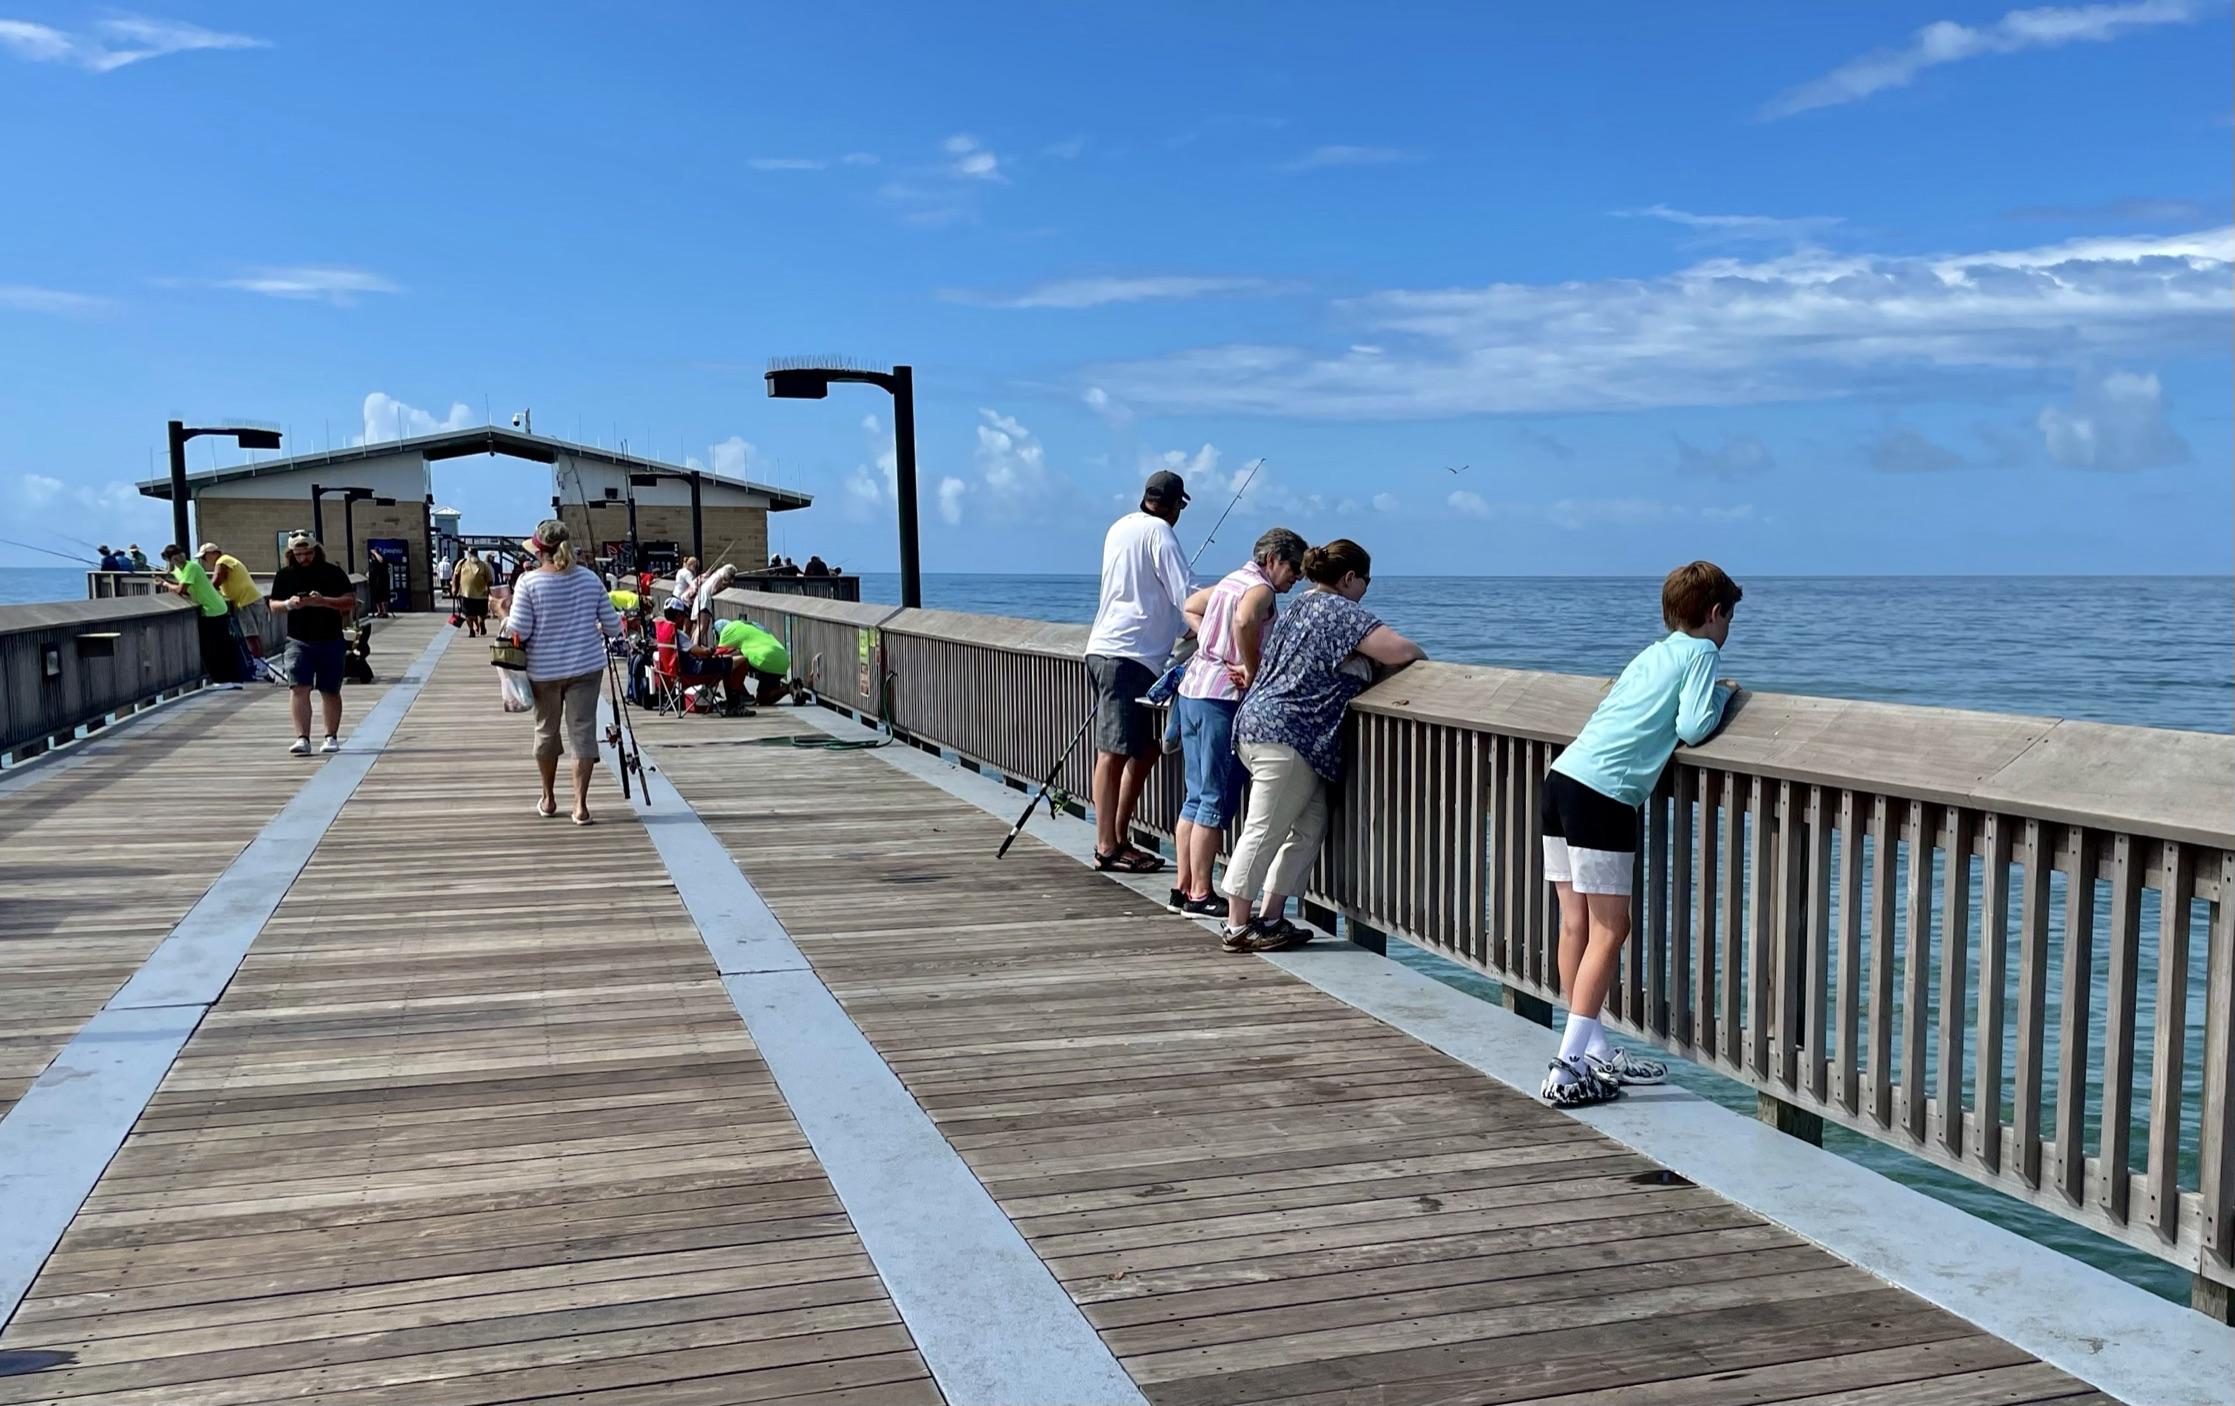 Gulf State Park Pier With Family Fishing on Pier